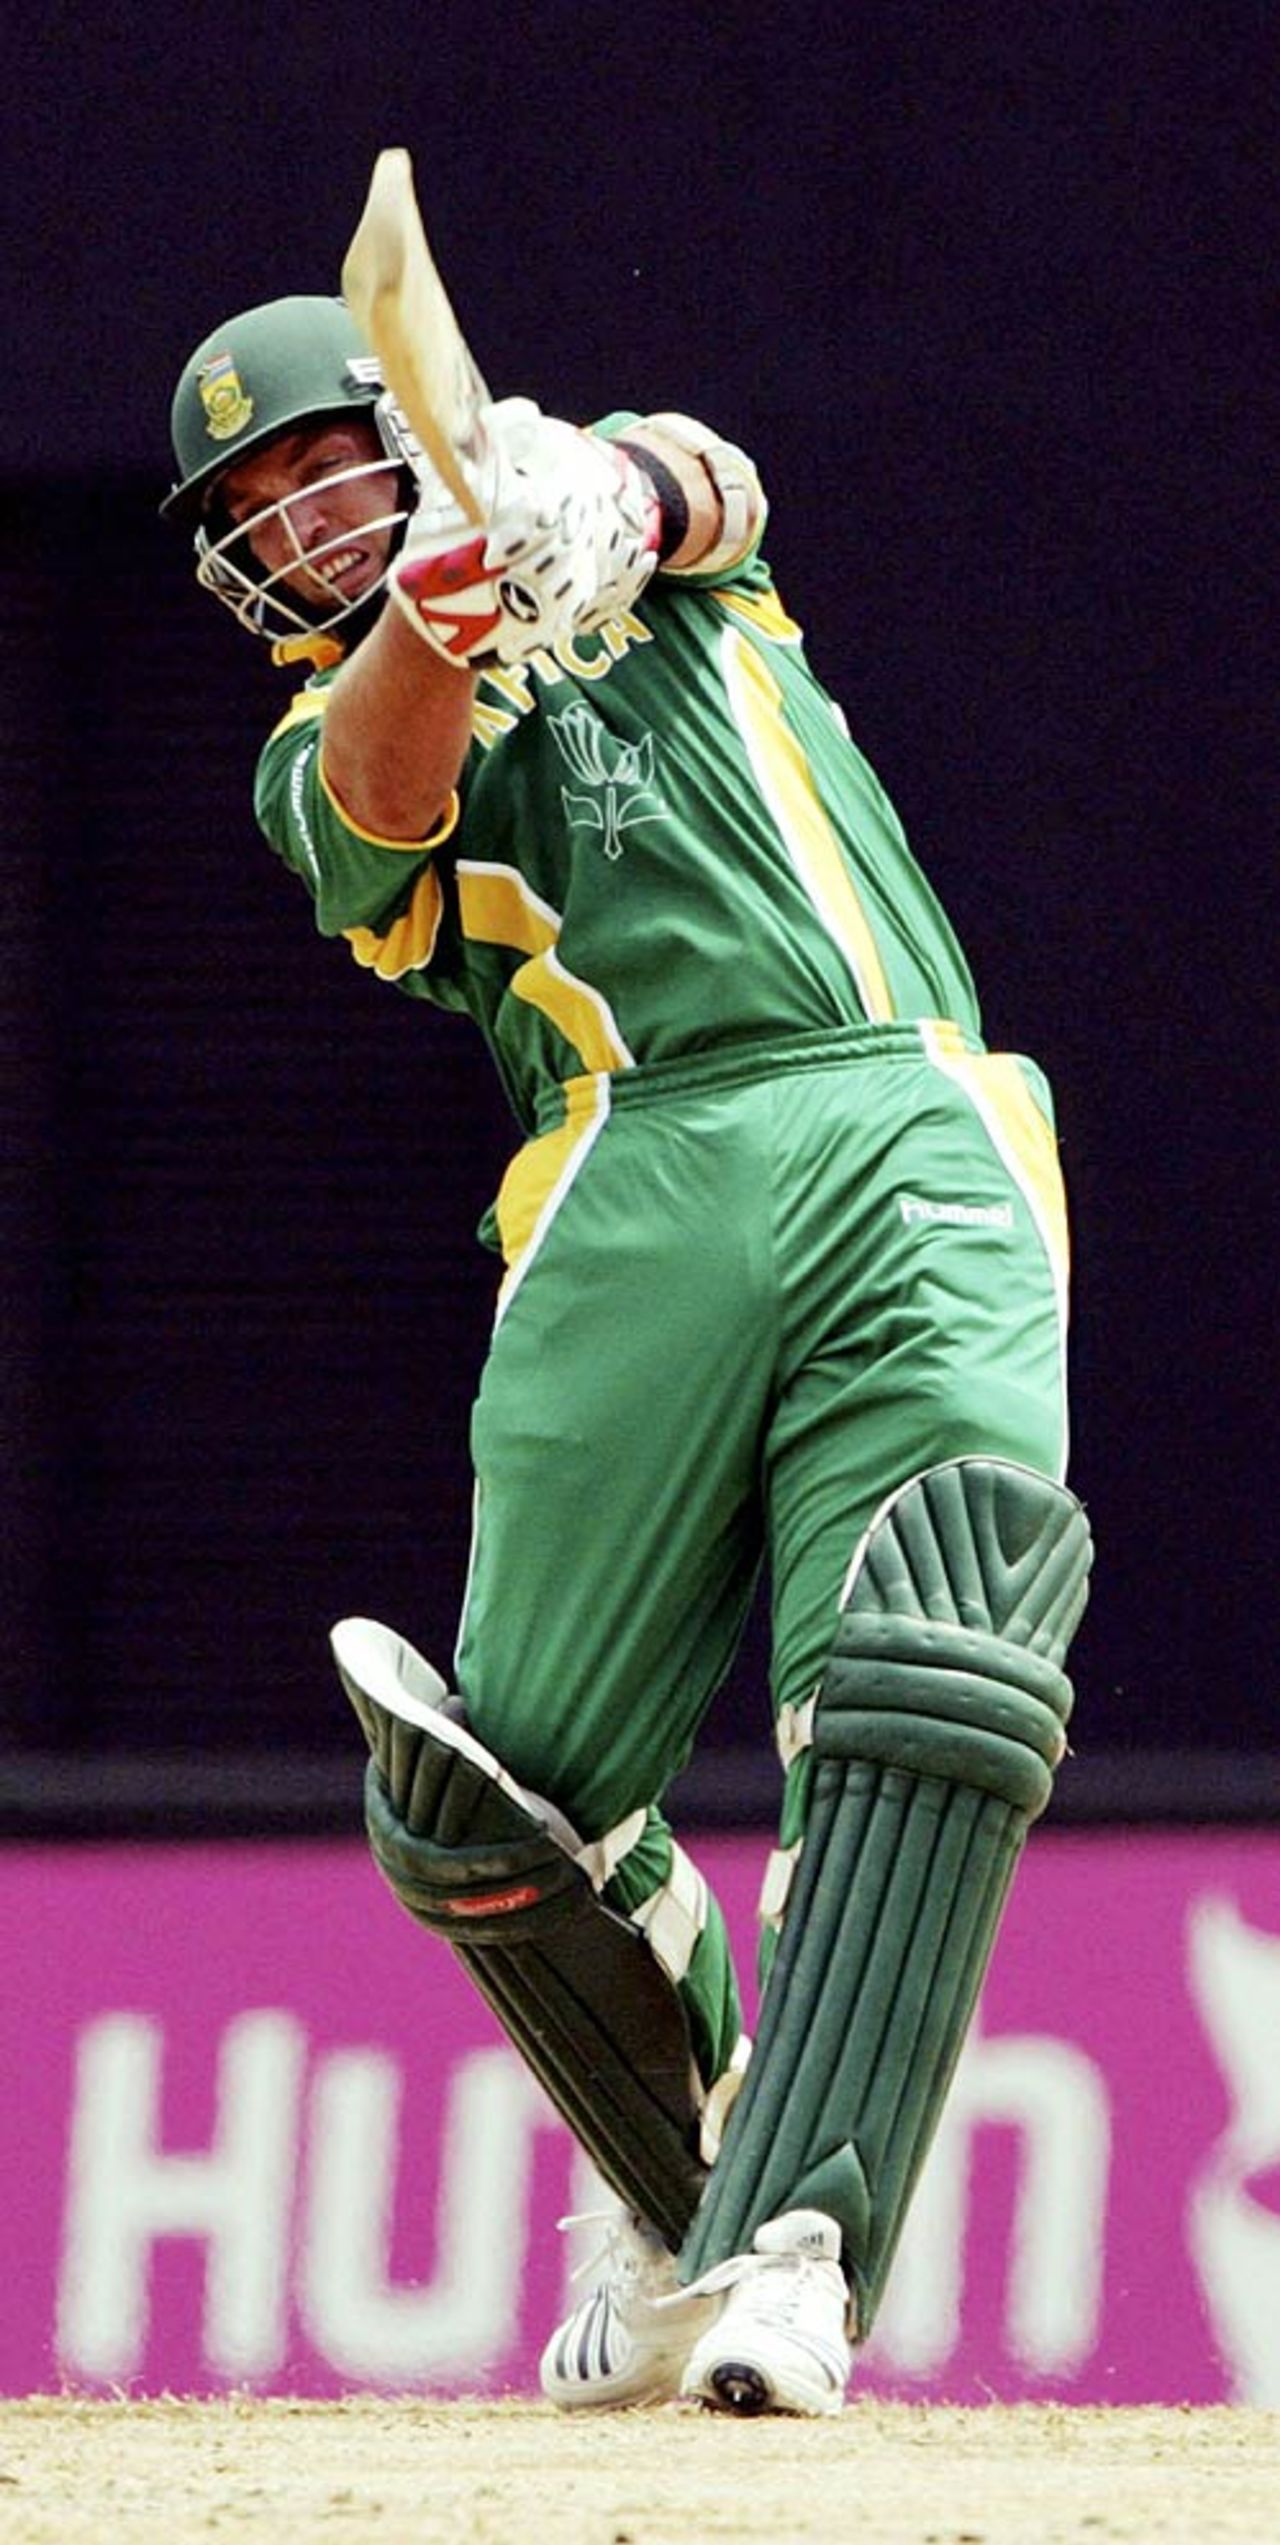 Jacques Kallis drives during his innings of 81, South Africa v West Indies, Super Eights, Grenada, April 10, 2007